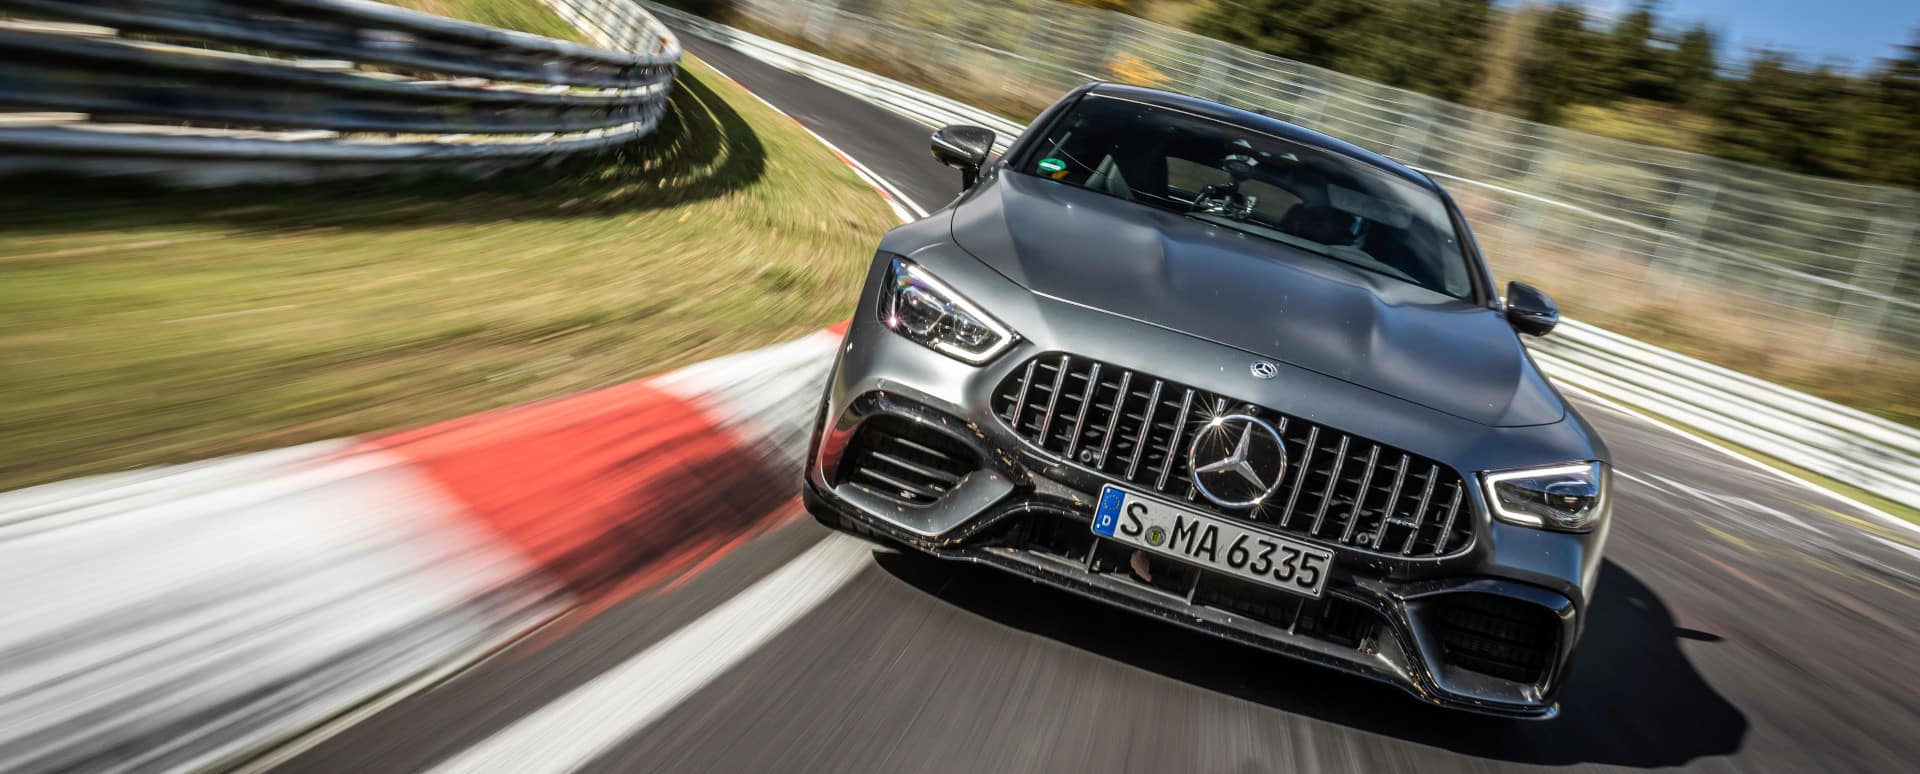 Guide to Mercedes-AMG: What Does It Mean?